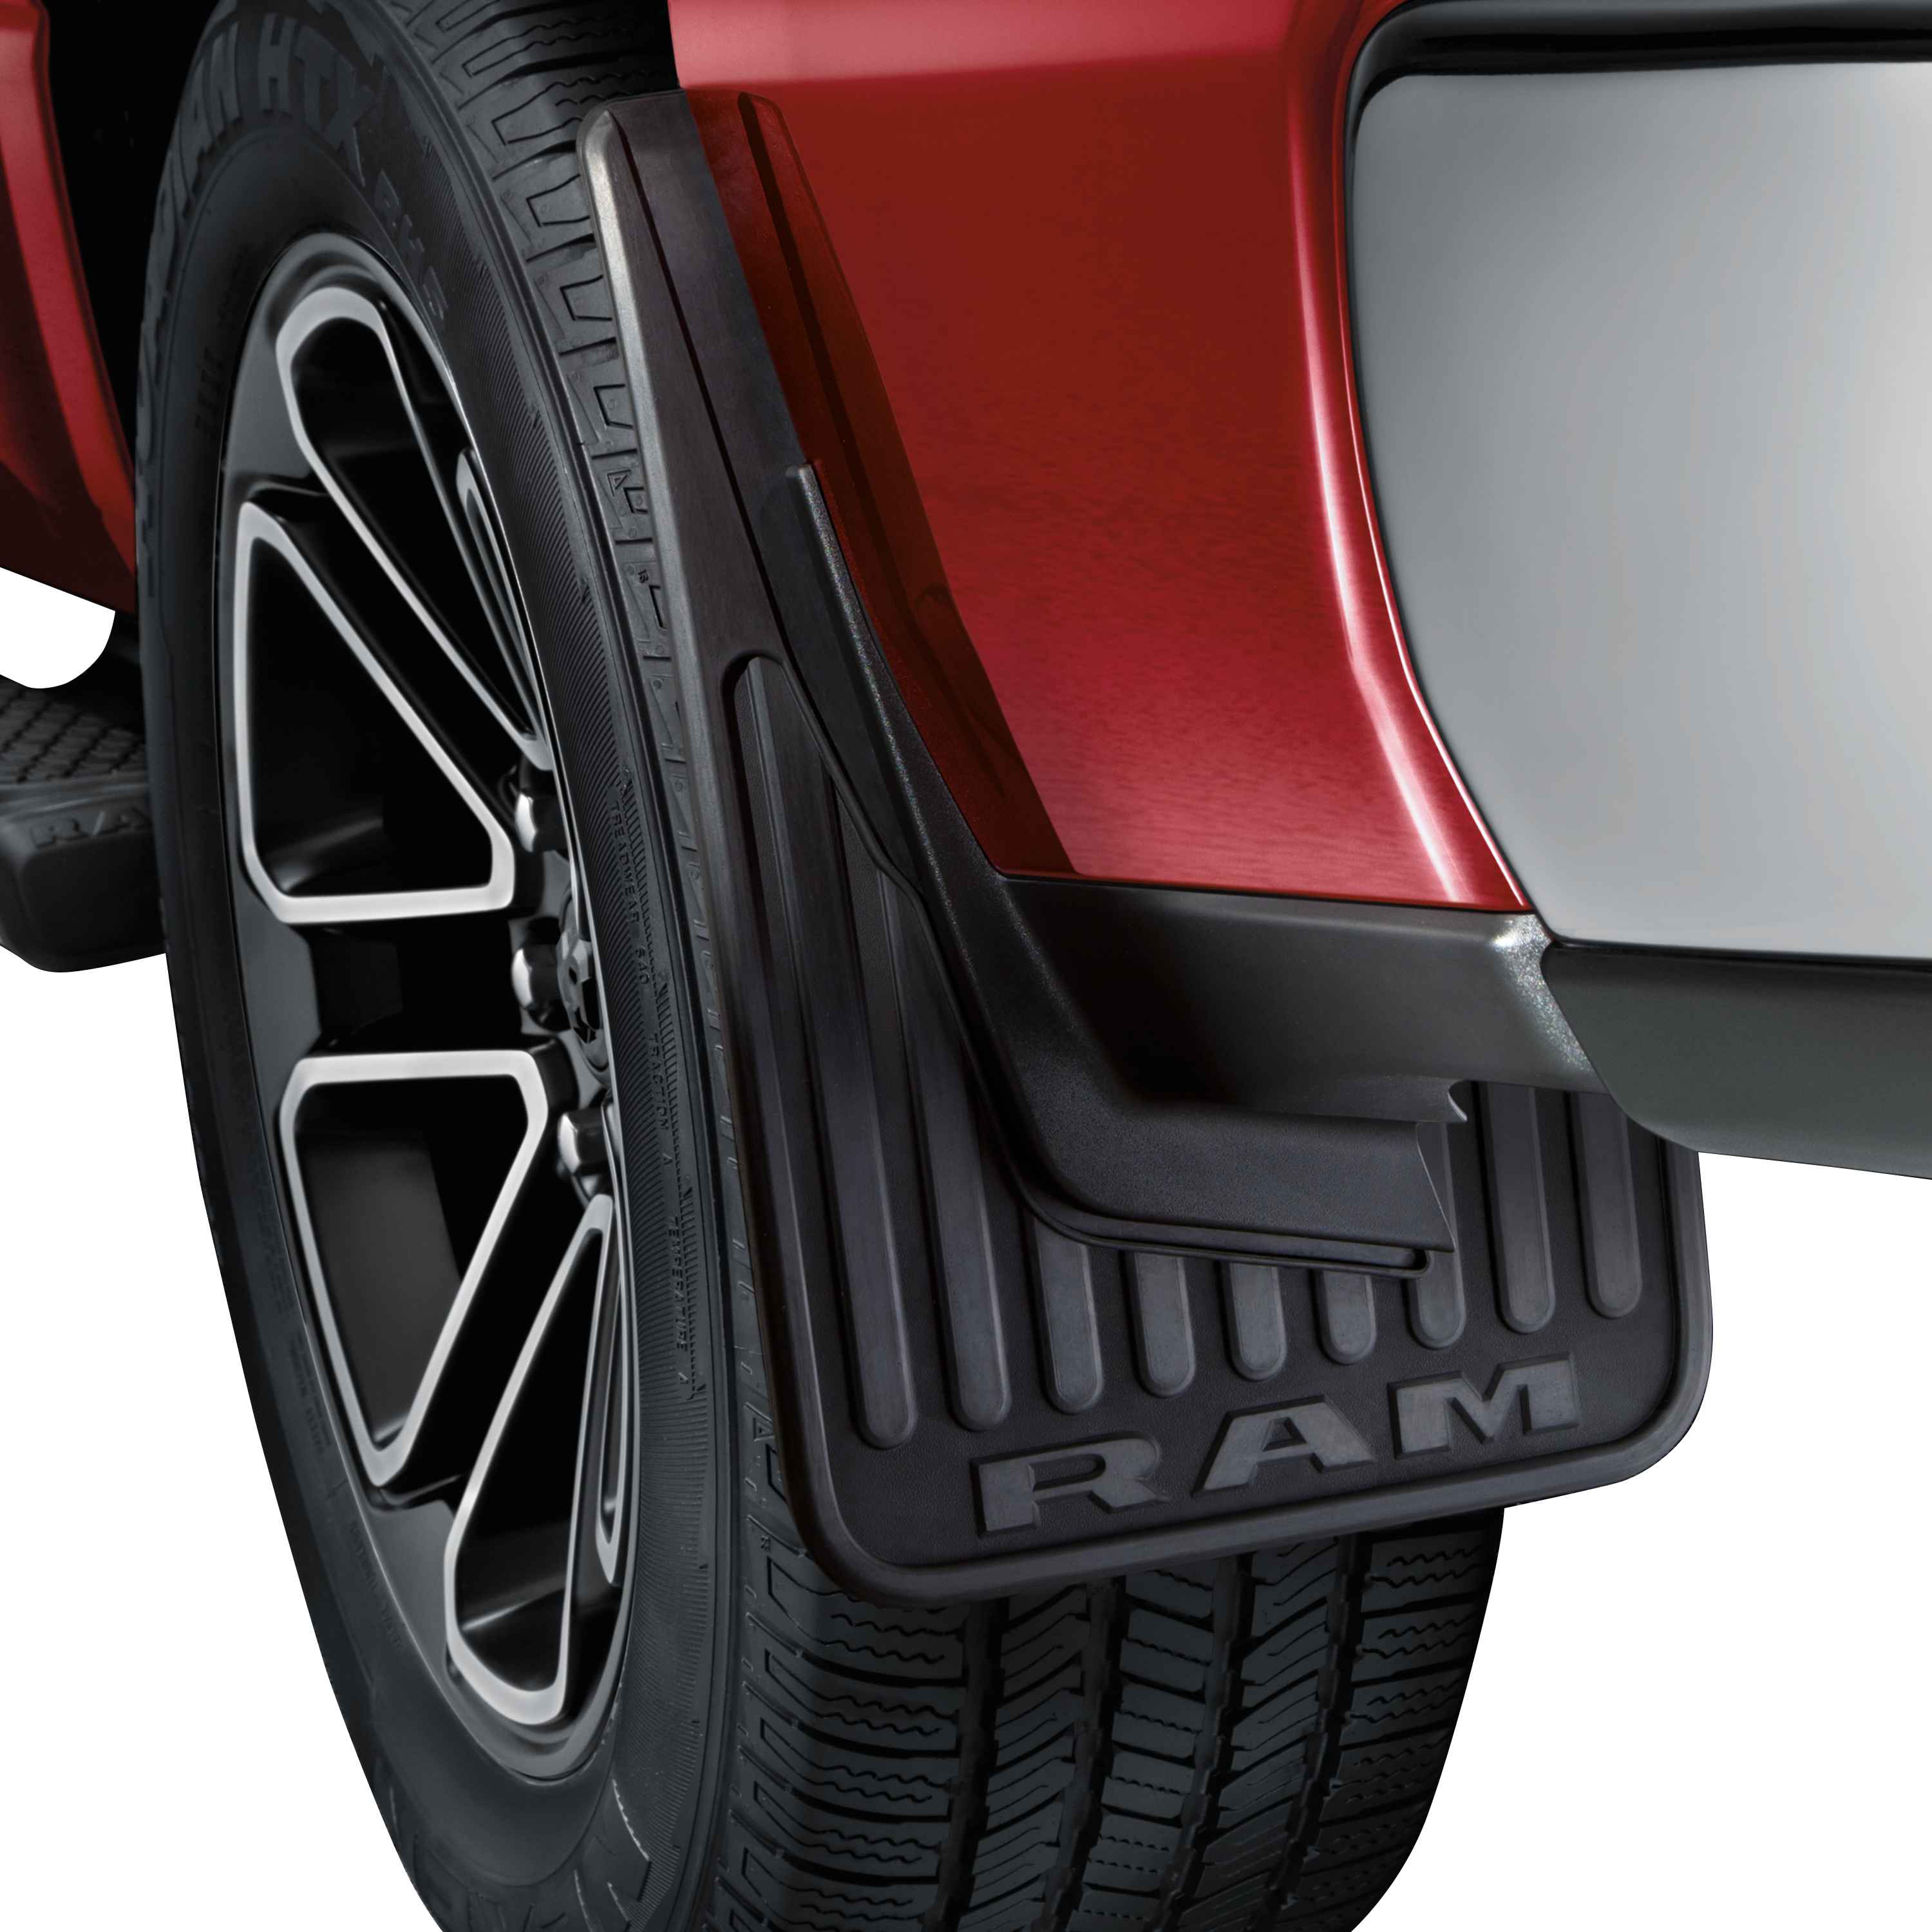 Splash Guards, Heavy-Duty Rubber Rear for Vehicles without production Fender Flares